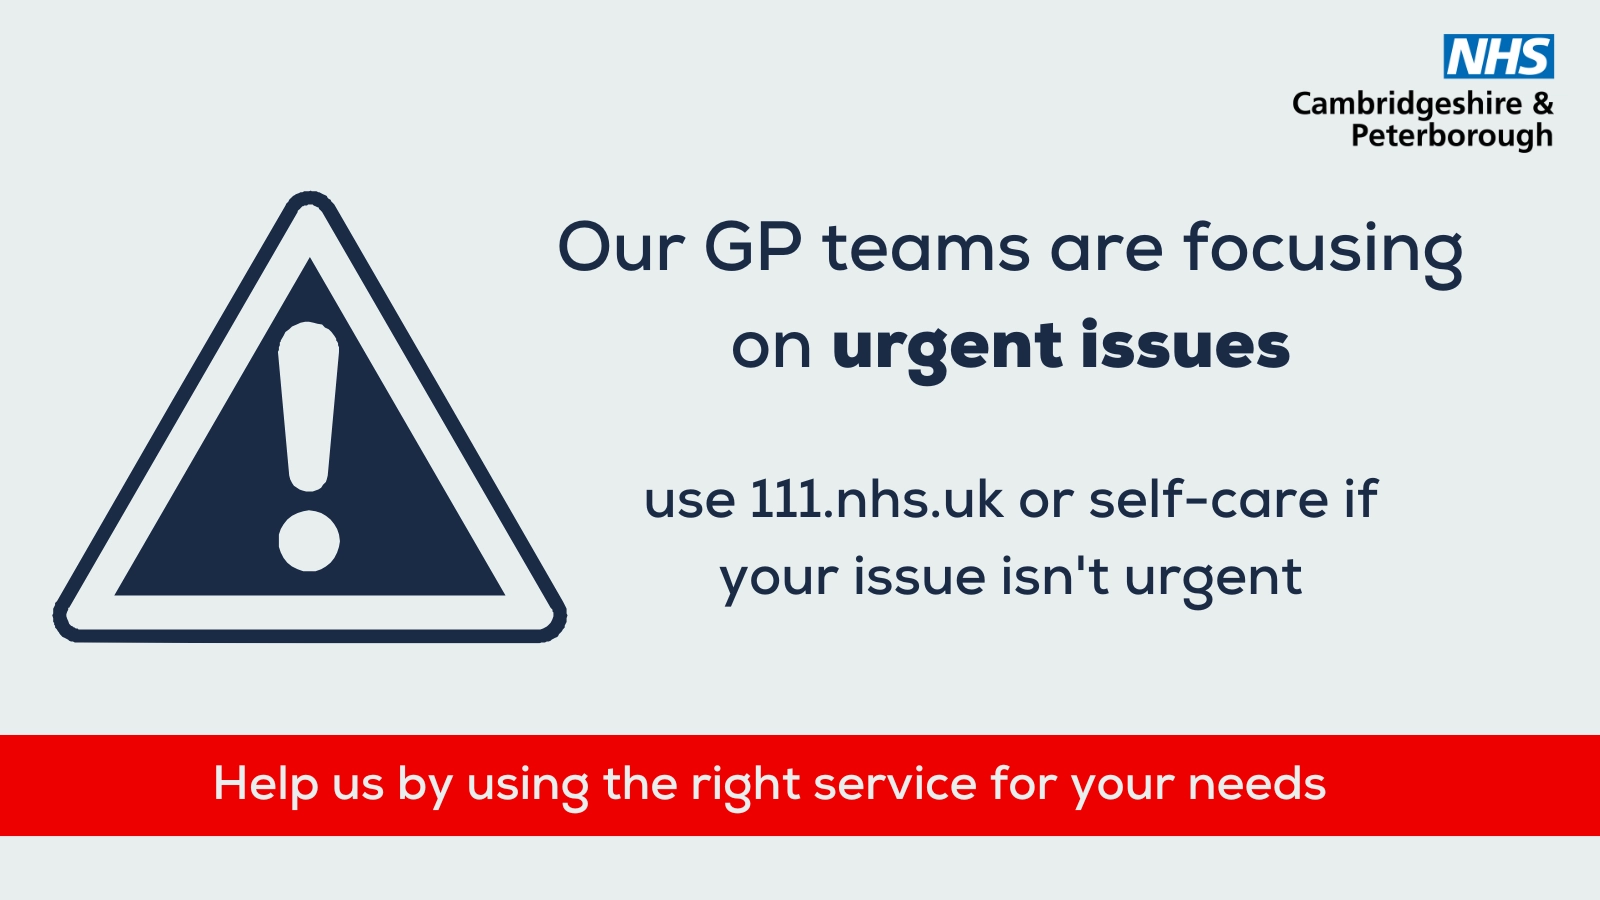 Grey background with NHS Cambridgeshire & Peterborough logo. Features drawing of a warning sign. Text reads: Our GP teams are focusing on urgent issues. Use 111.nhs.uk or self-care if your issue isn’t urgent. Red bar at bottom of the image reads: Help us by using the right service for your needs